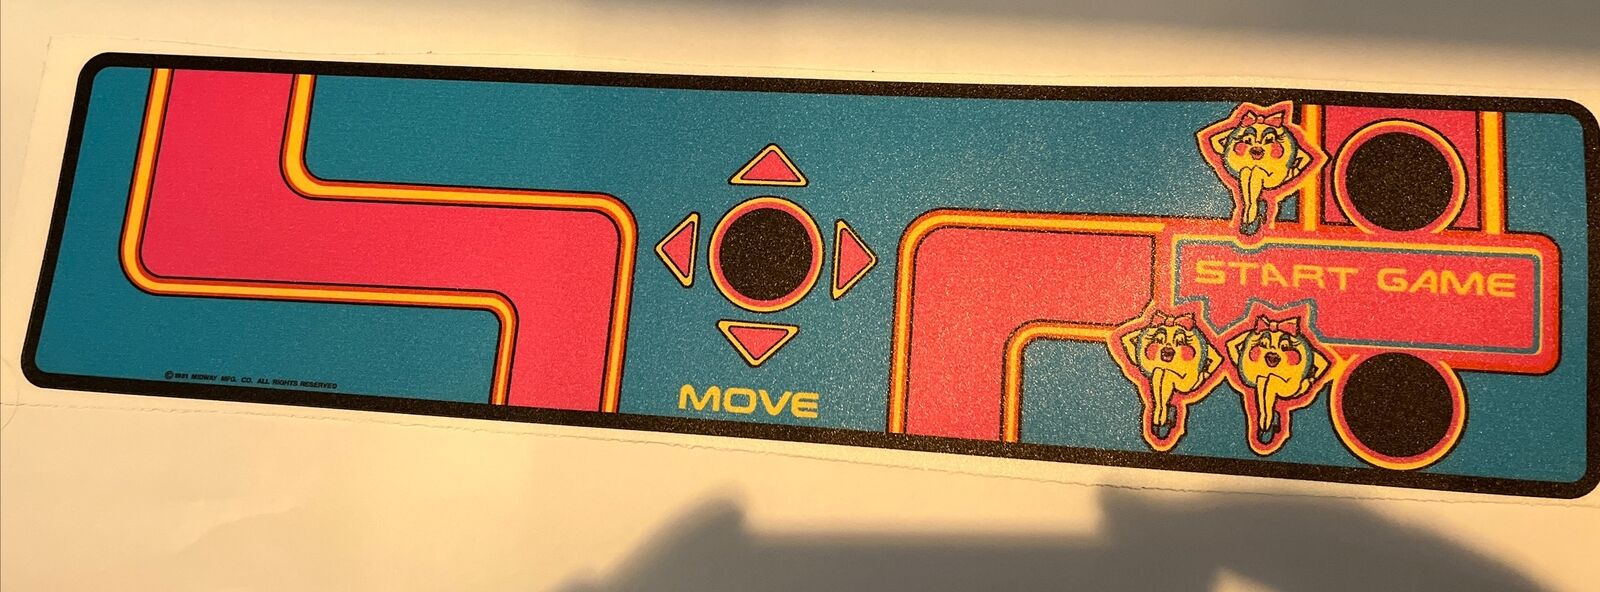 1981 MS PAC MAN CPO Arcade Control Panel Overlay Upright Game